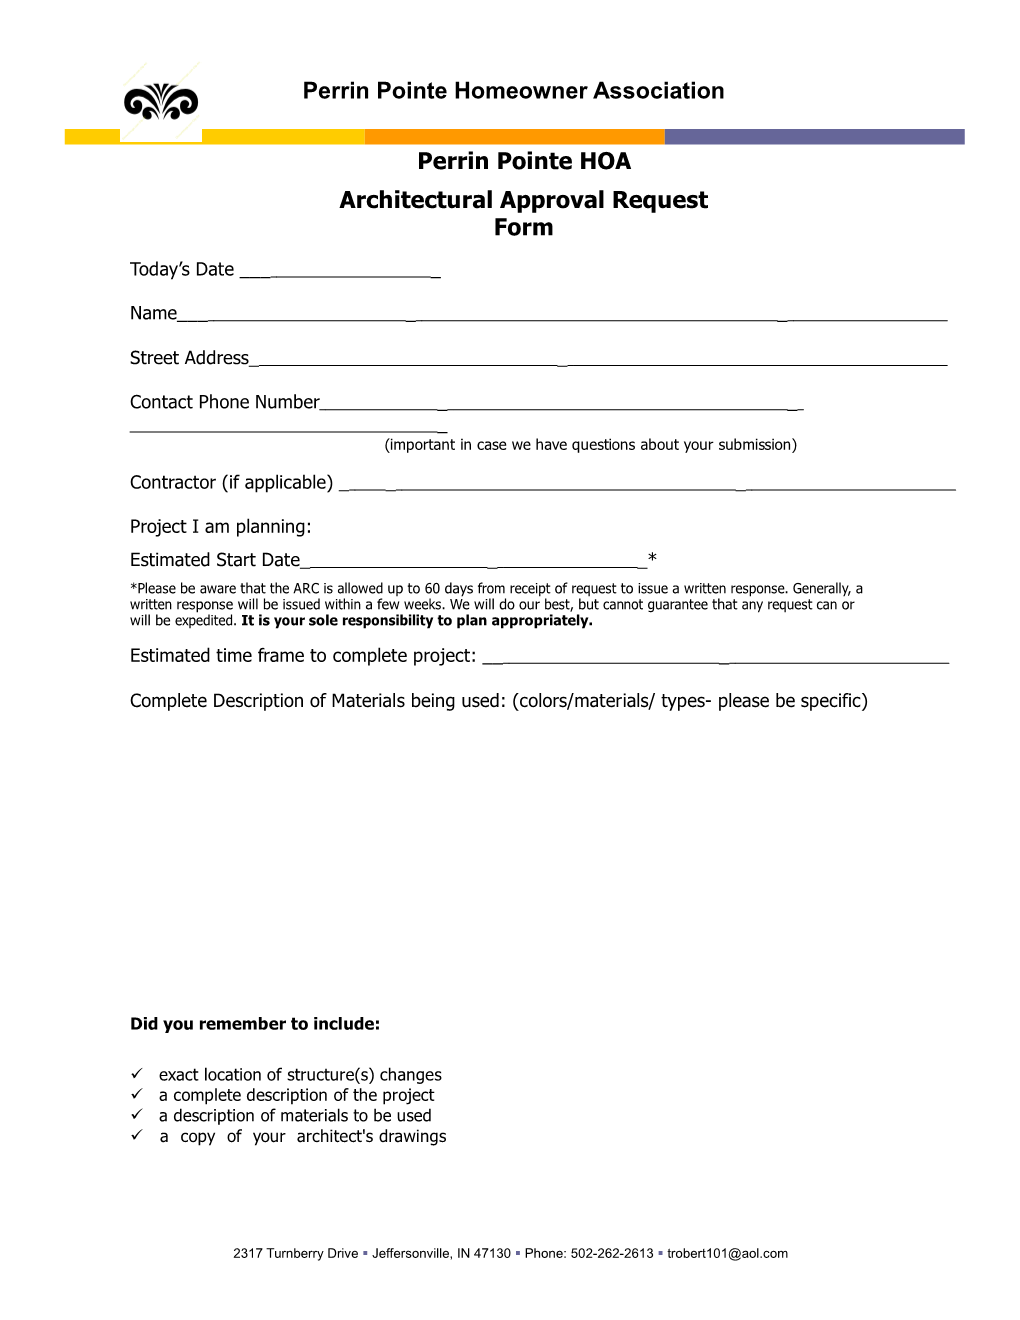 Architectural Approval Request Form